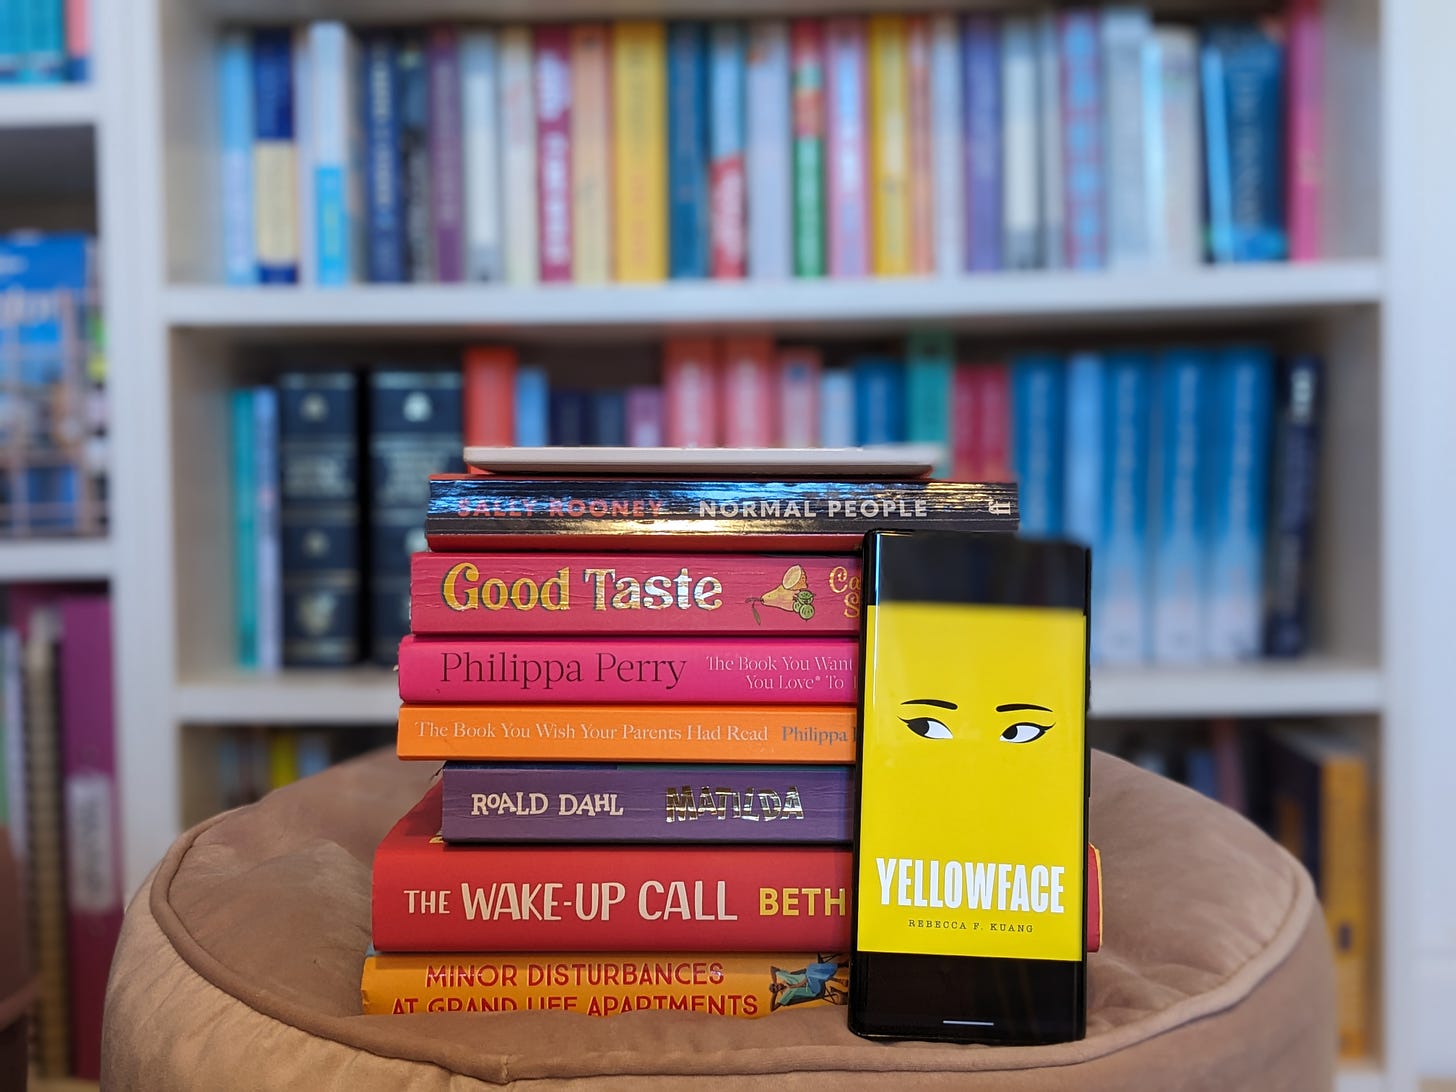 A pile of books, plus a phone propped up with Yellowface by Rebecca F.Kuang on the screen.